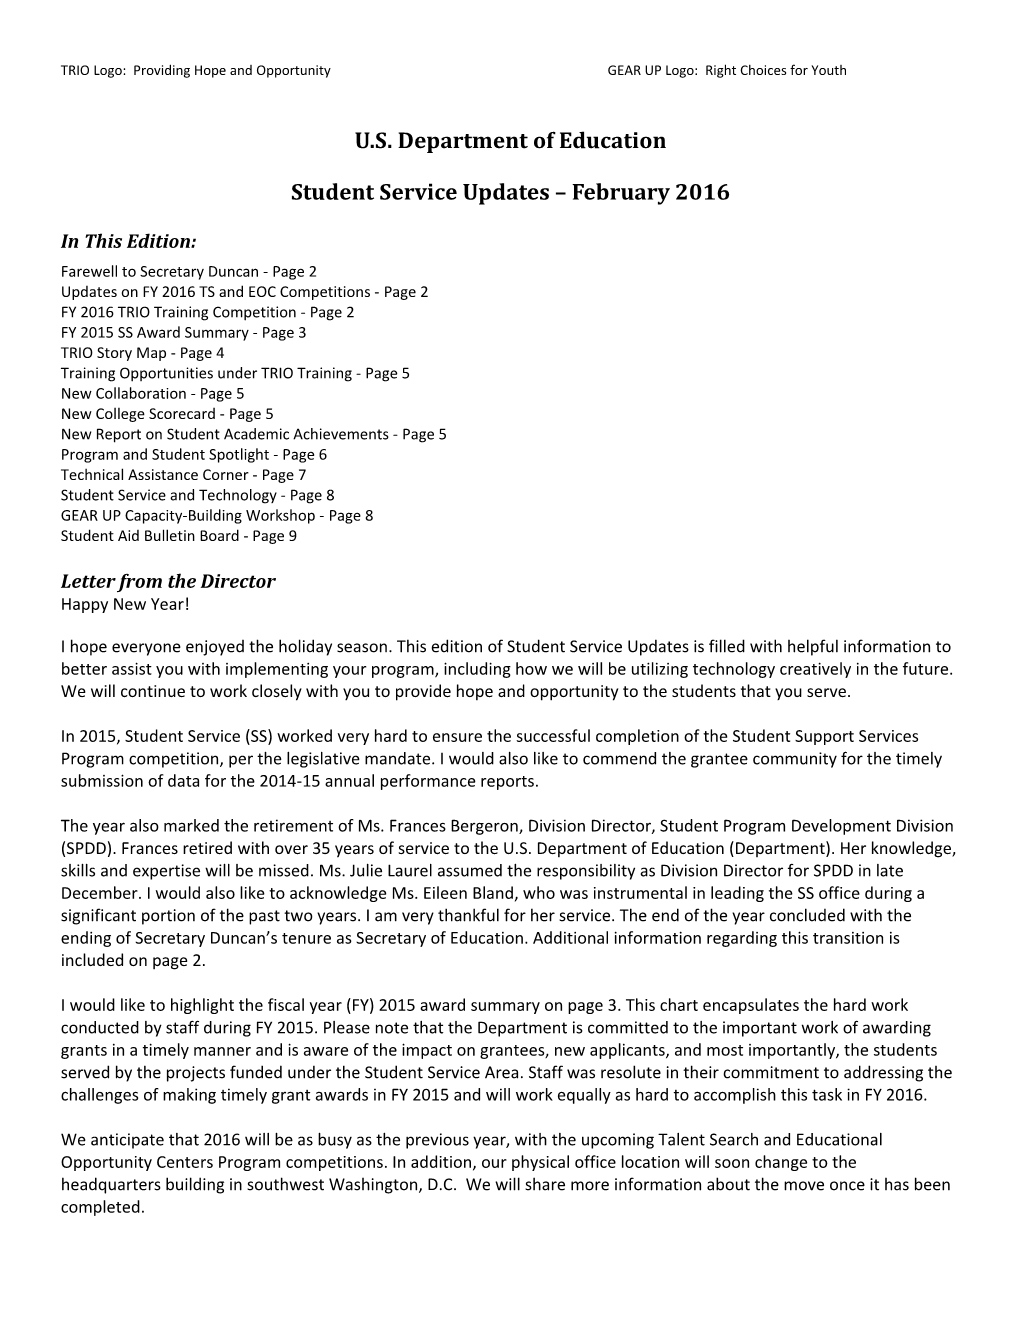 Student Service Updates February 2016 Newsletter (MS Word)